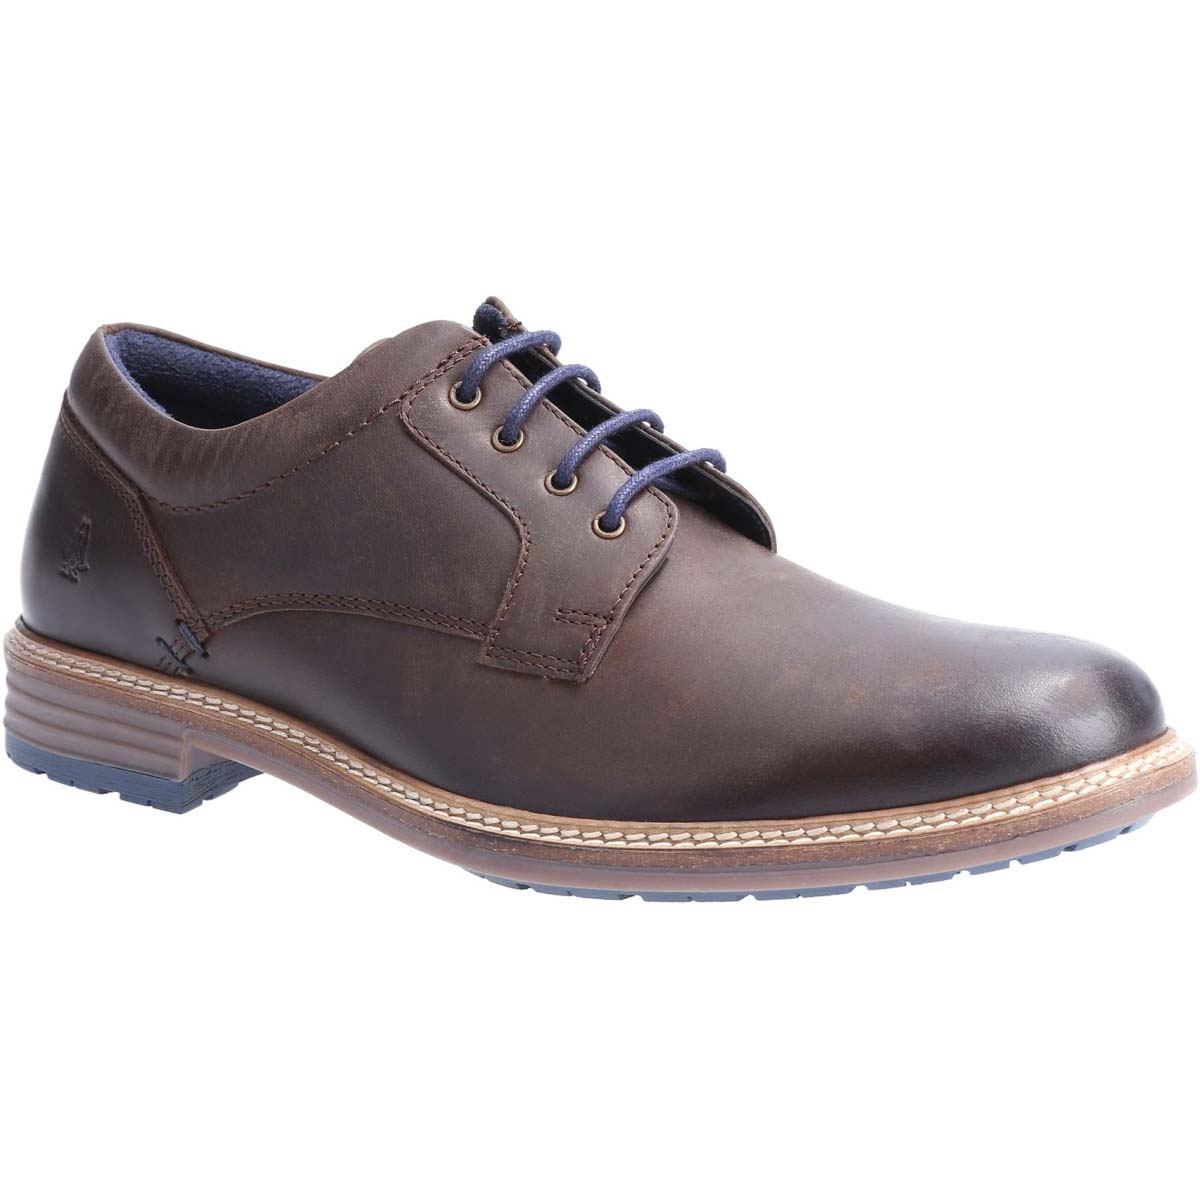 Hush Puppies Julian Lace Up Brown Mens formal shoes 35650-66503 in a Plain Leather in Size 11